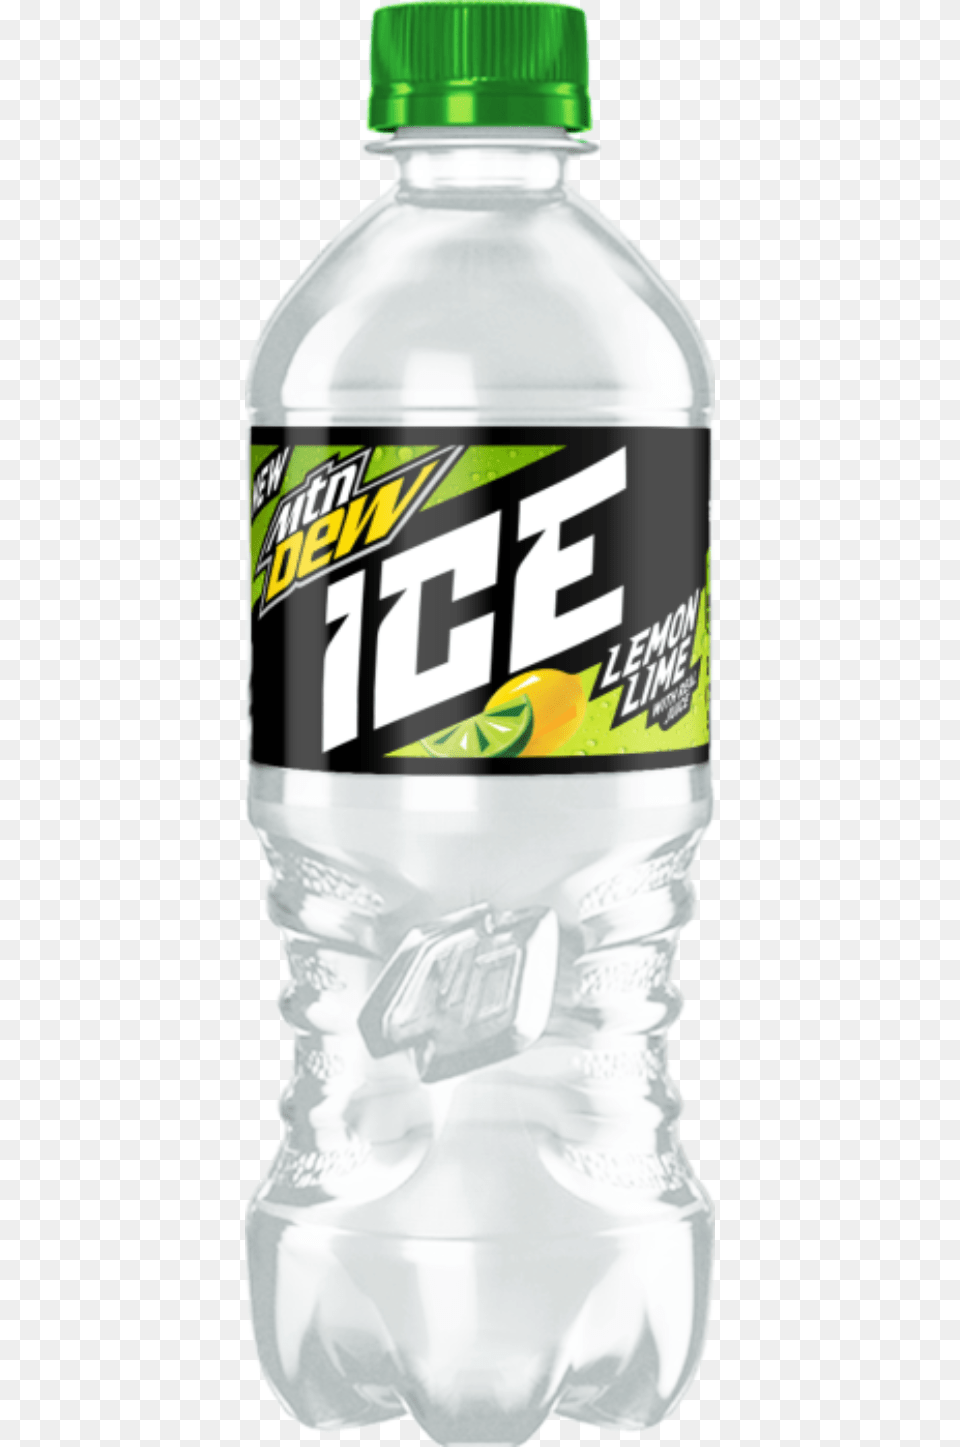 Mountain Dew Ice Prototype Bottle Design Mountain Dew Ice Cherry, Water Bottle, Shaker, Beverage, Mineral Water Free Png